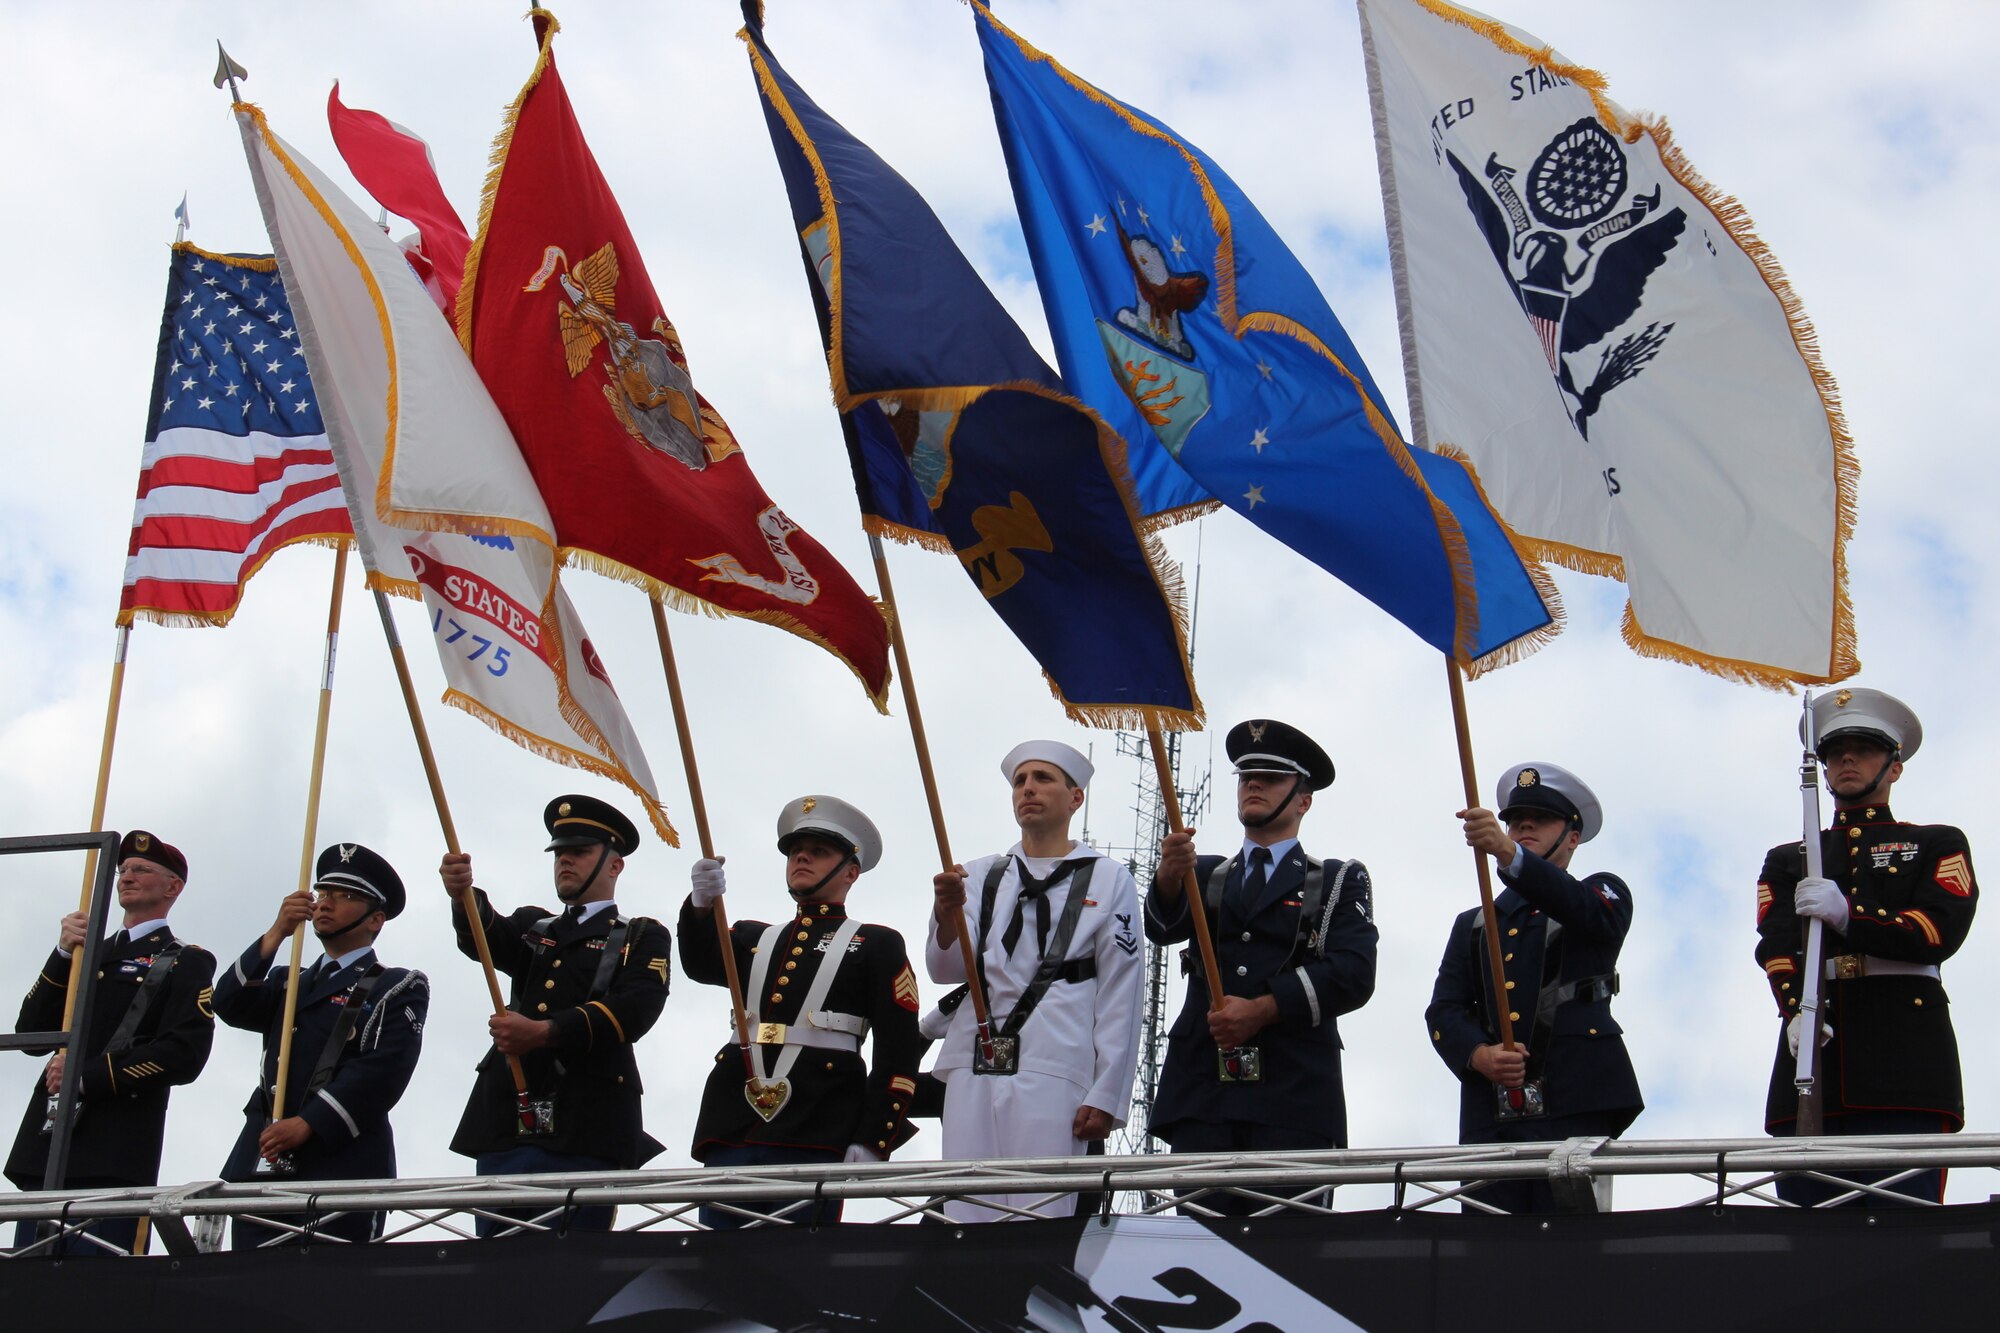 130601-Z-NV943-173: A Joint Honor Guard consisting of Army, Air Force, Marine Corps, Navy and Coast Guard members presents the colors during pre-race festivities on June 2, 2013, during the 2013 Chevrolet Detroit Belle Isle Grand Prix. More than 50 military members from the various branches and units at Selfridge Air National Guard Base, Mich., took part in five volunteer events over the race weekend. Grand Prix officials invited the military members to participate in the events to show their appreciation for their service. (U.S. Air National Guard photo by Angela Pope/Released)